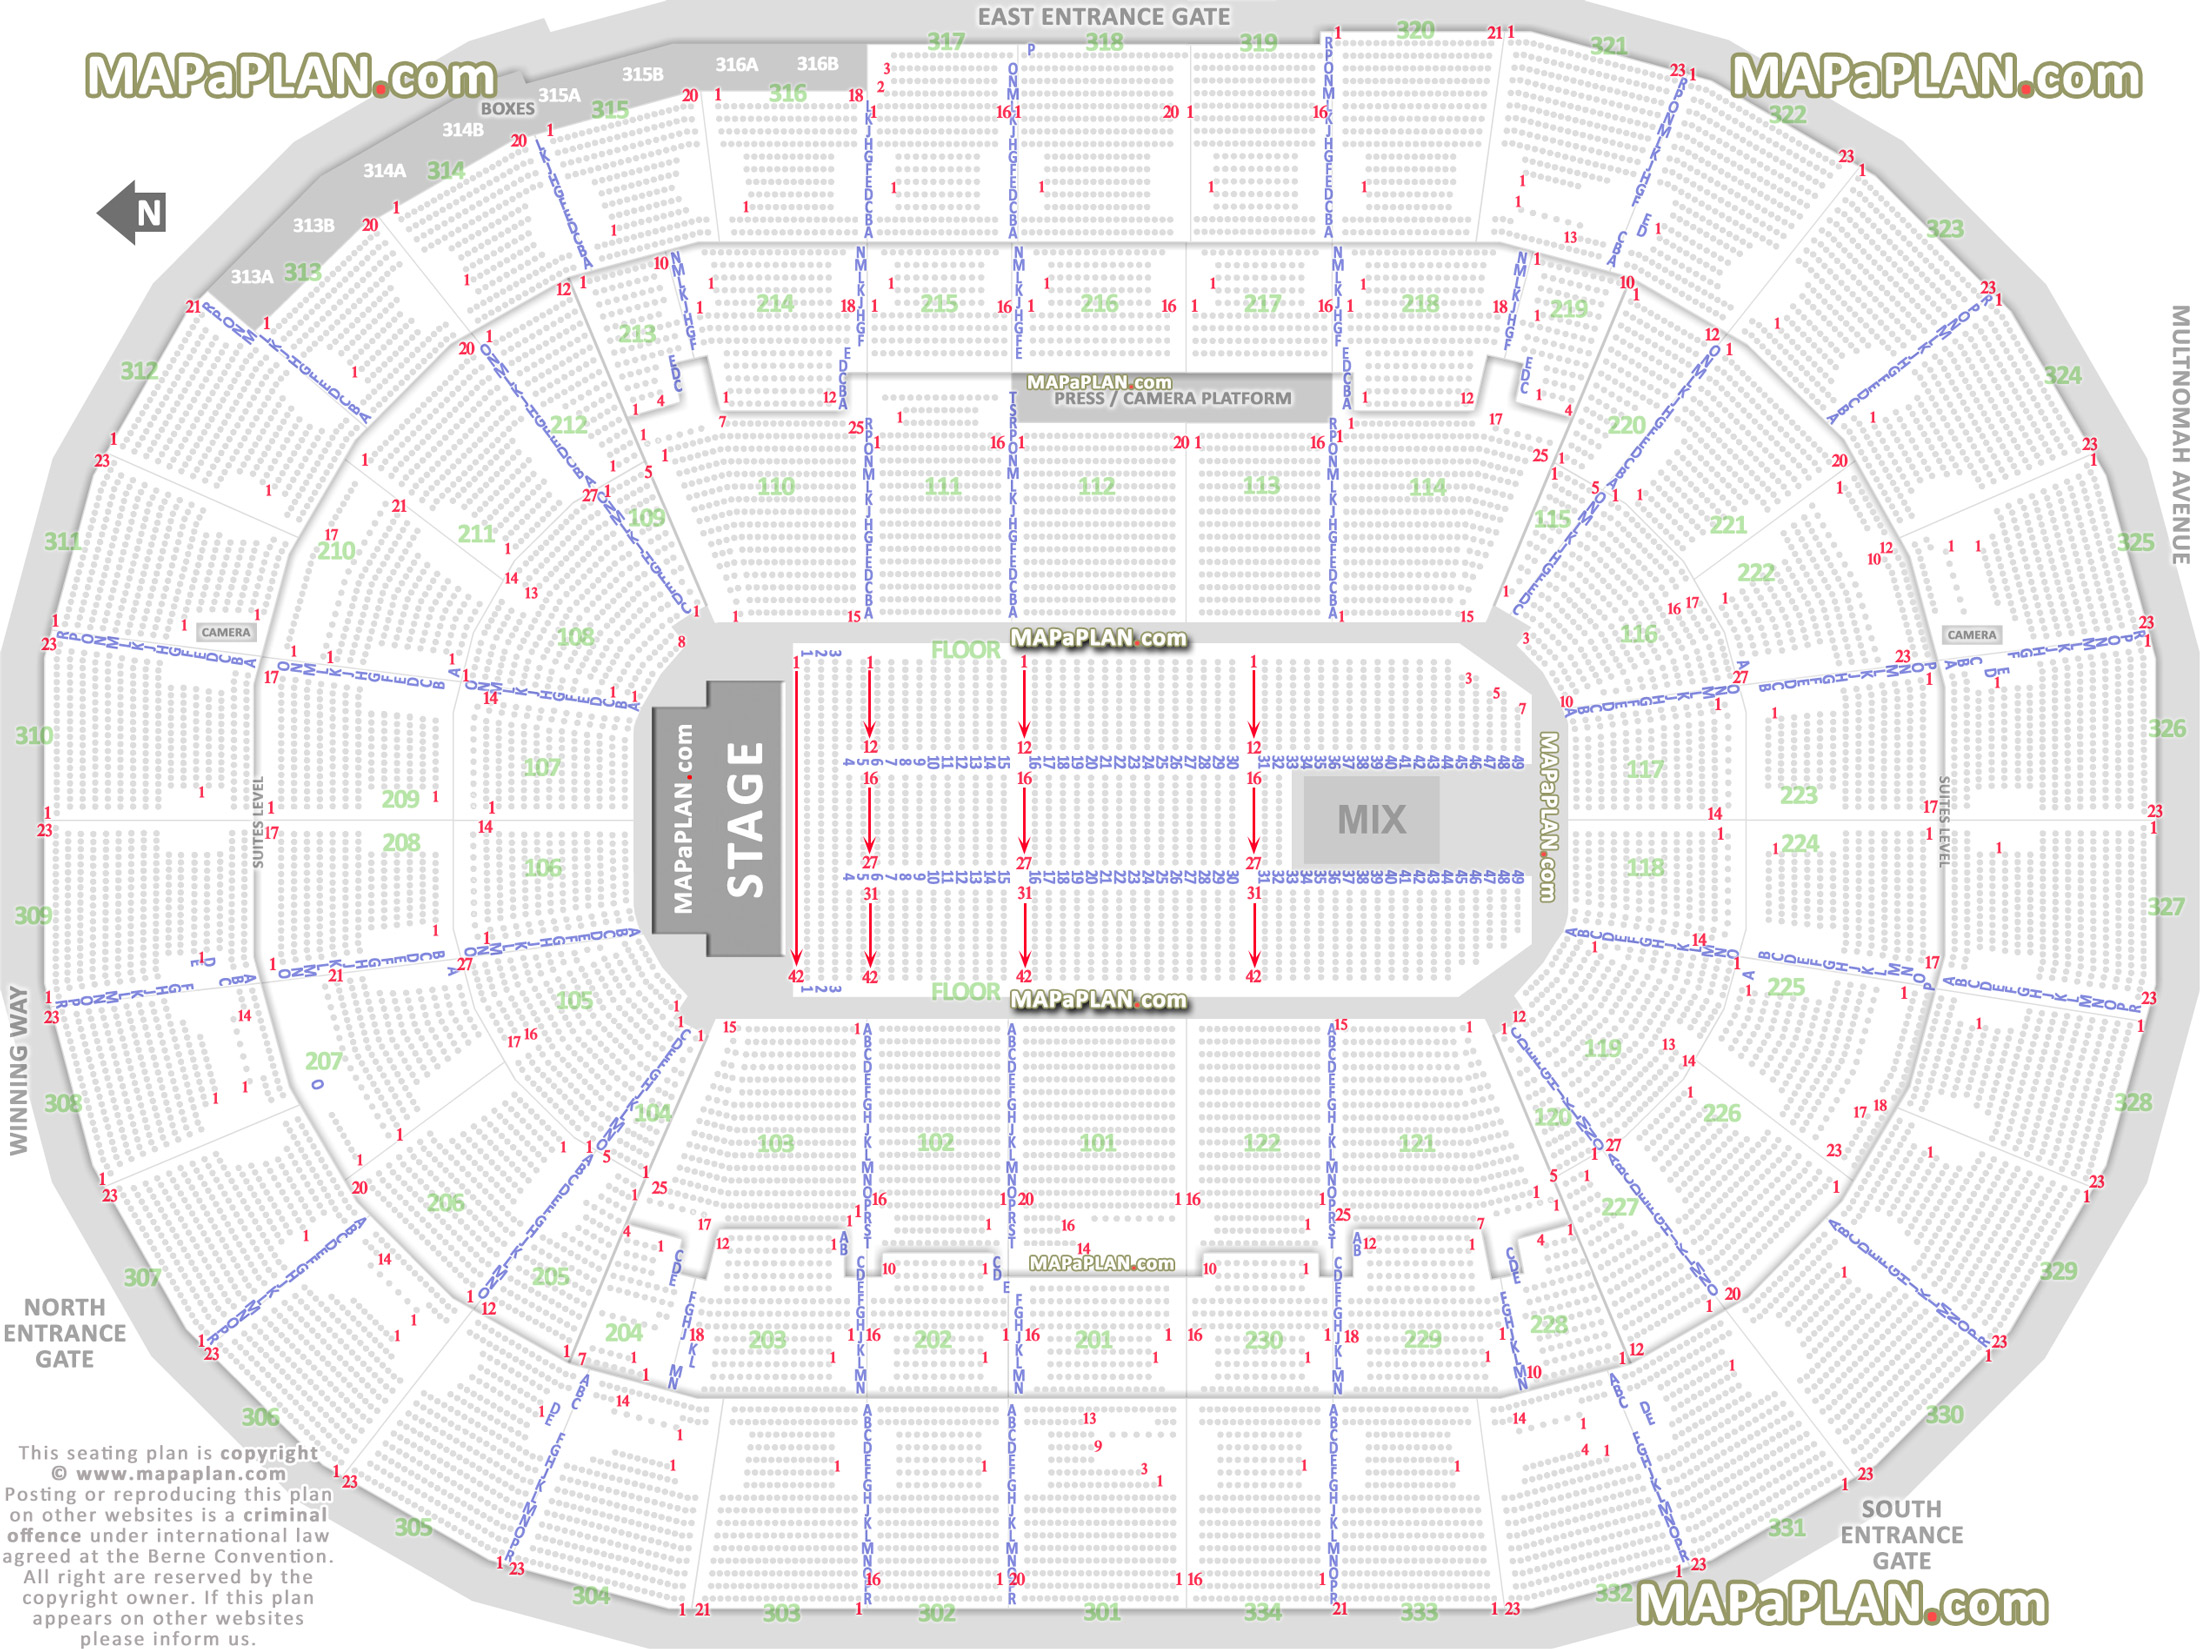 højen Grine billetpris Moda Center (Rose Garden Arena) - Detailed seat & row numbers end stage  concert sections floor plan map with arena 100, 200, 300 & club level  layout, Portland